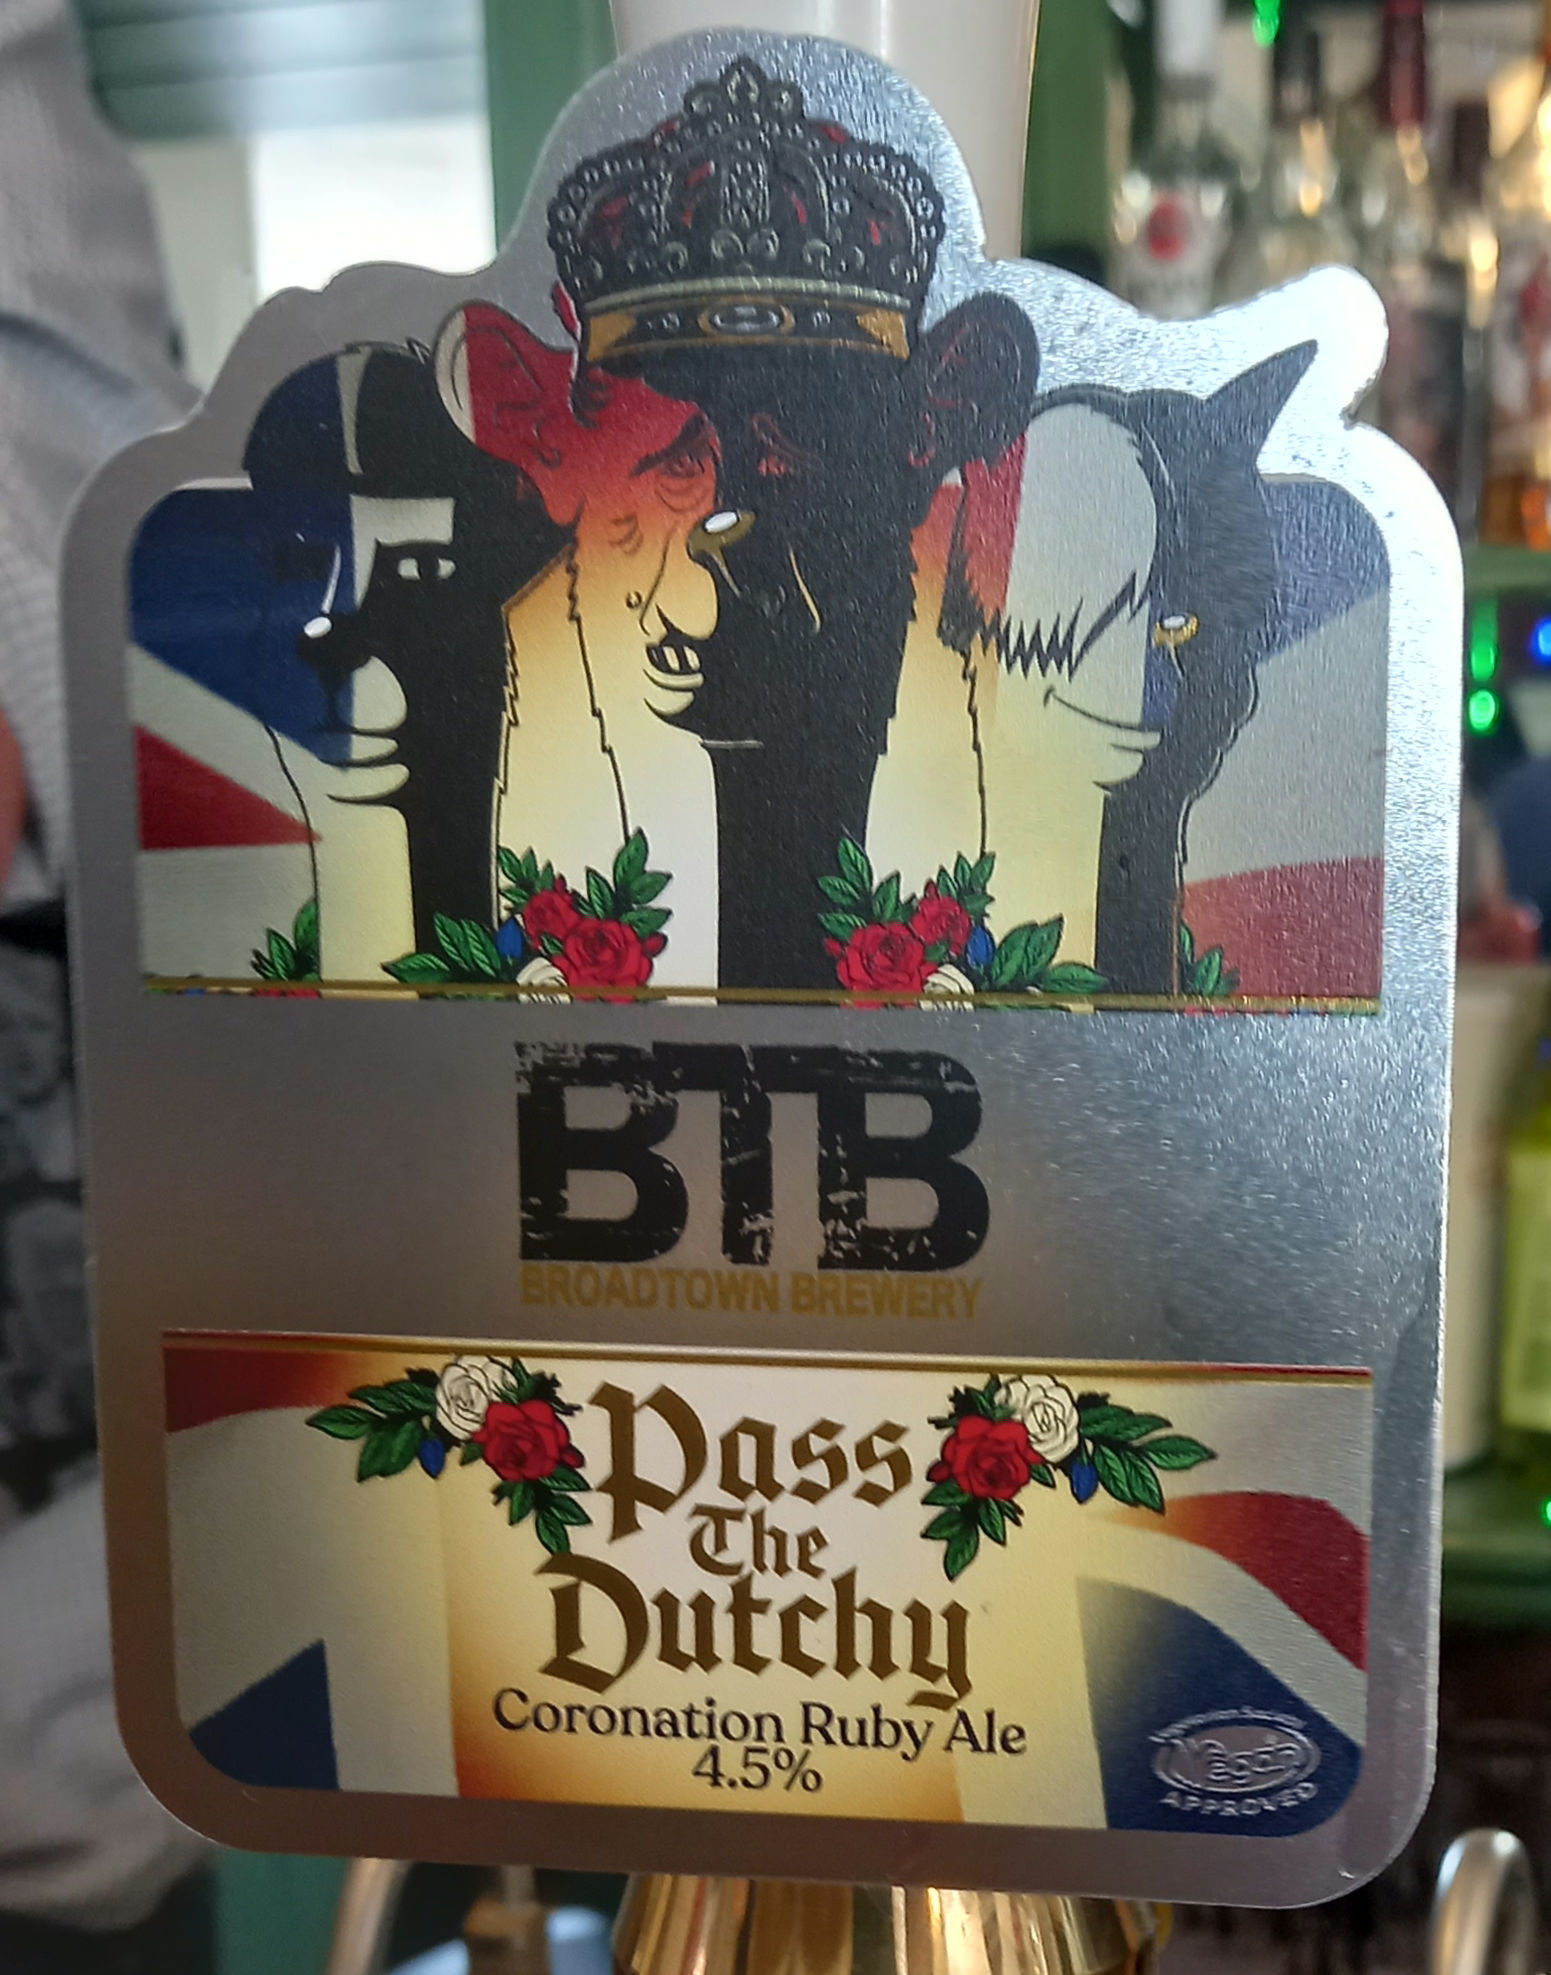 Pass the Dutchy - Broadtown Brewery